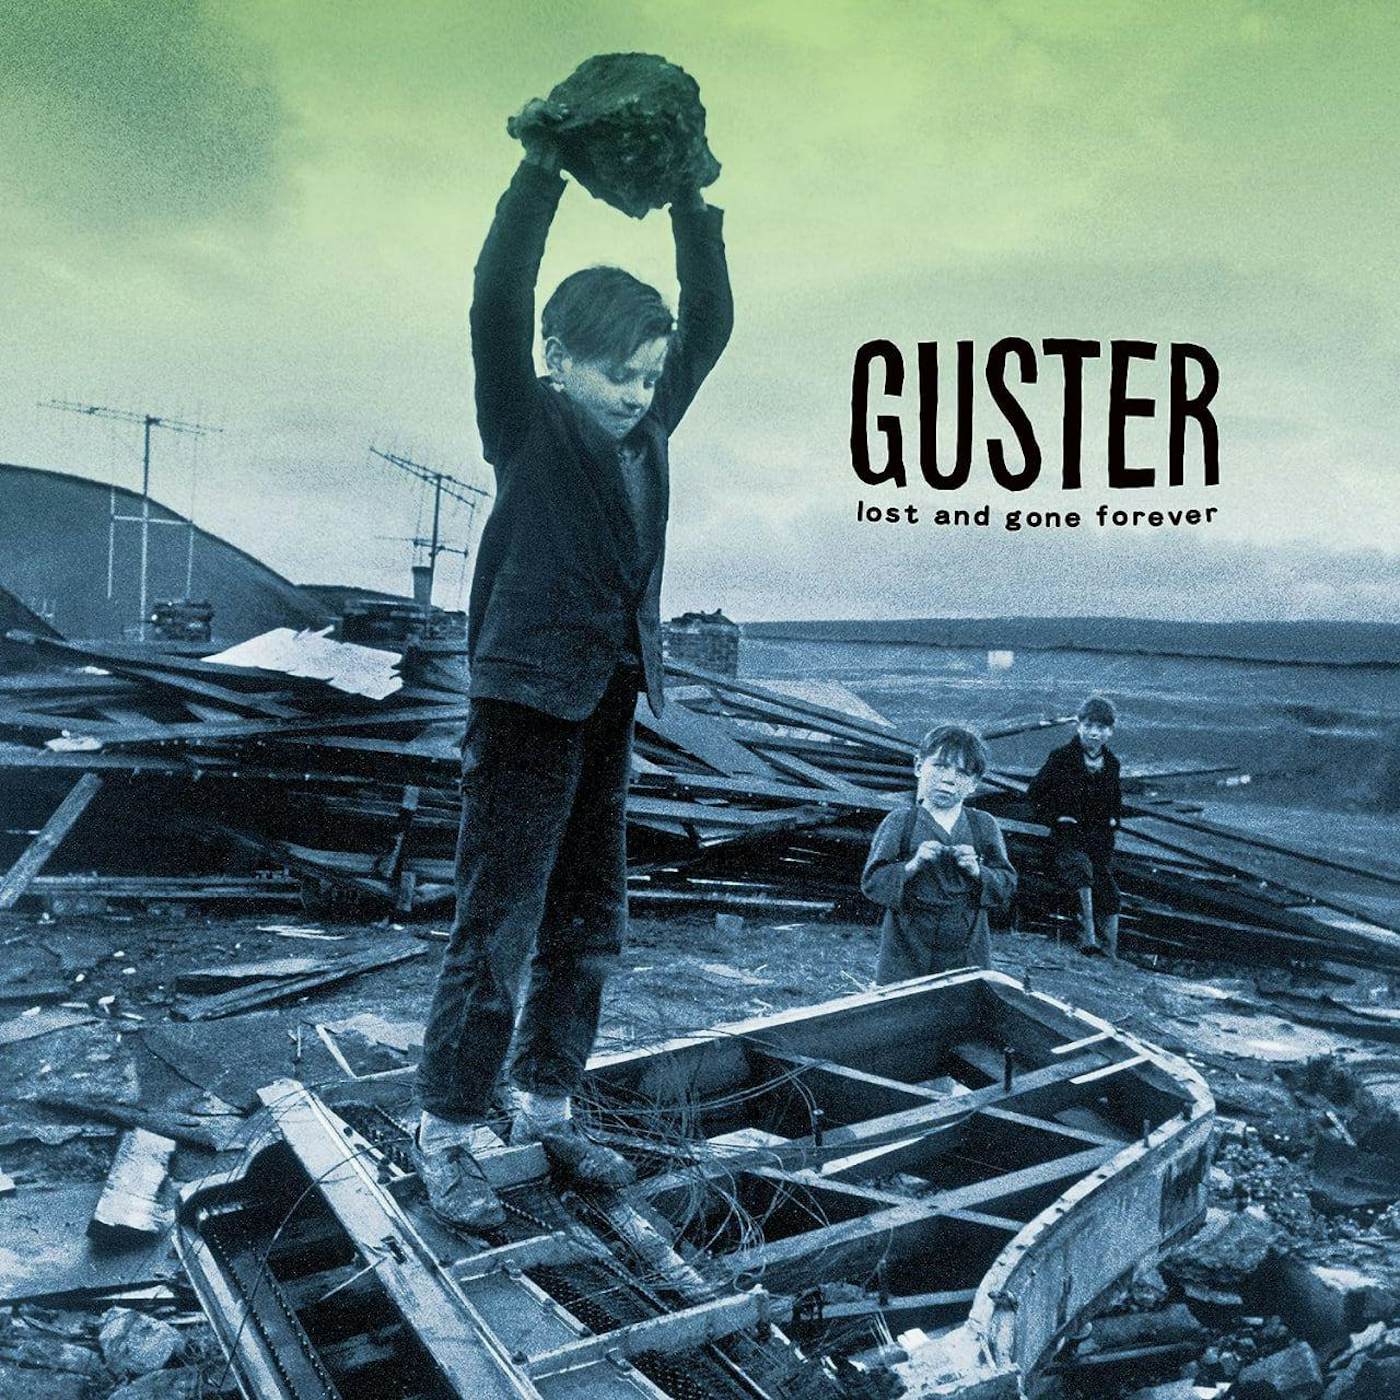 Guster Lost And Gone Forever (180g) Vinyl Record